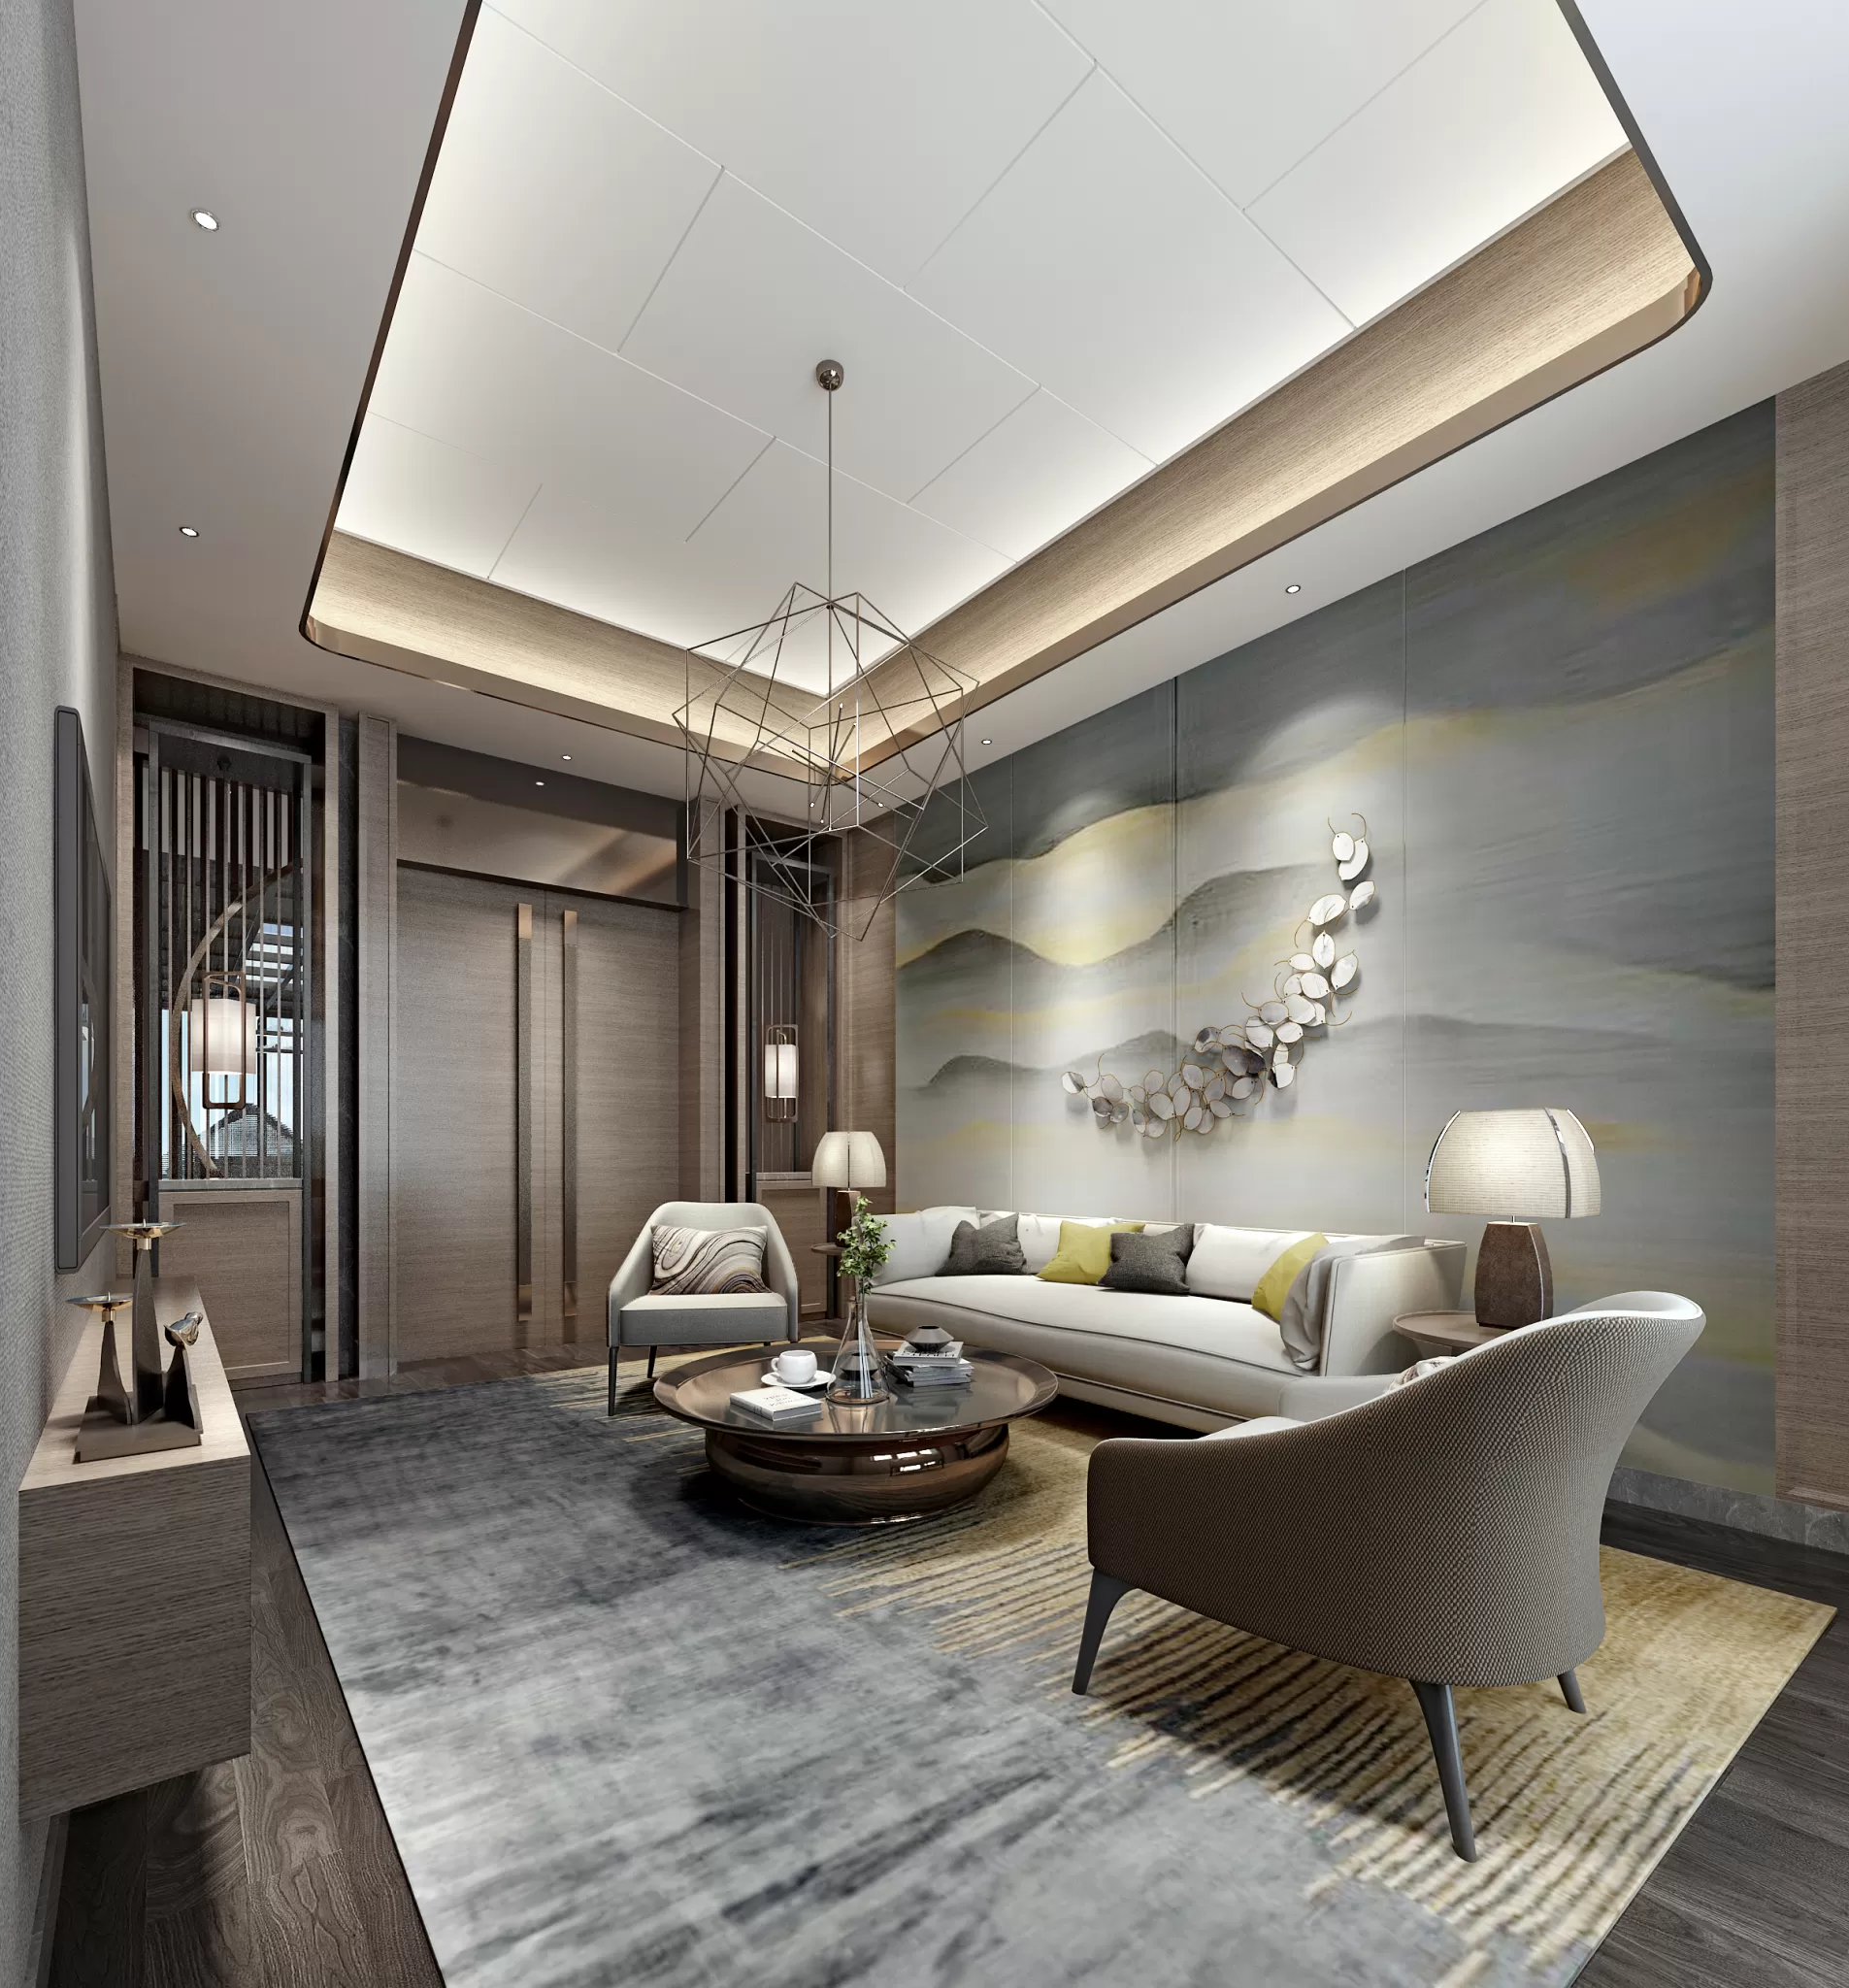 DESMOD INTERIOR 2021 (VRAY) – 4. LIVING ROOM – CHINESE – 003